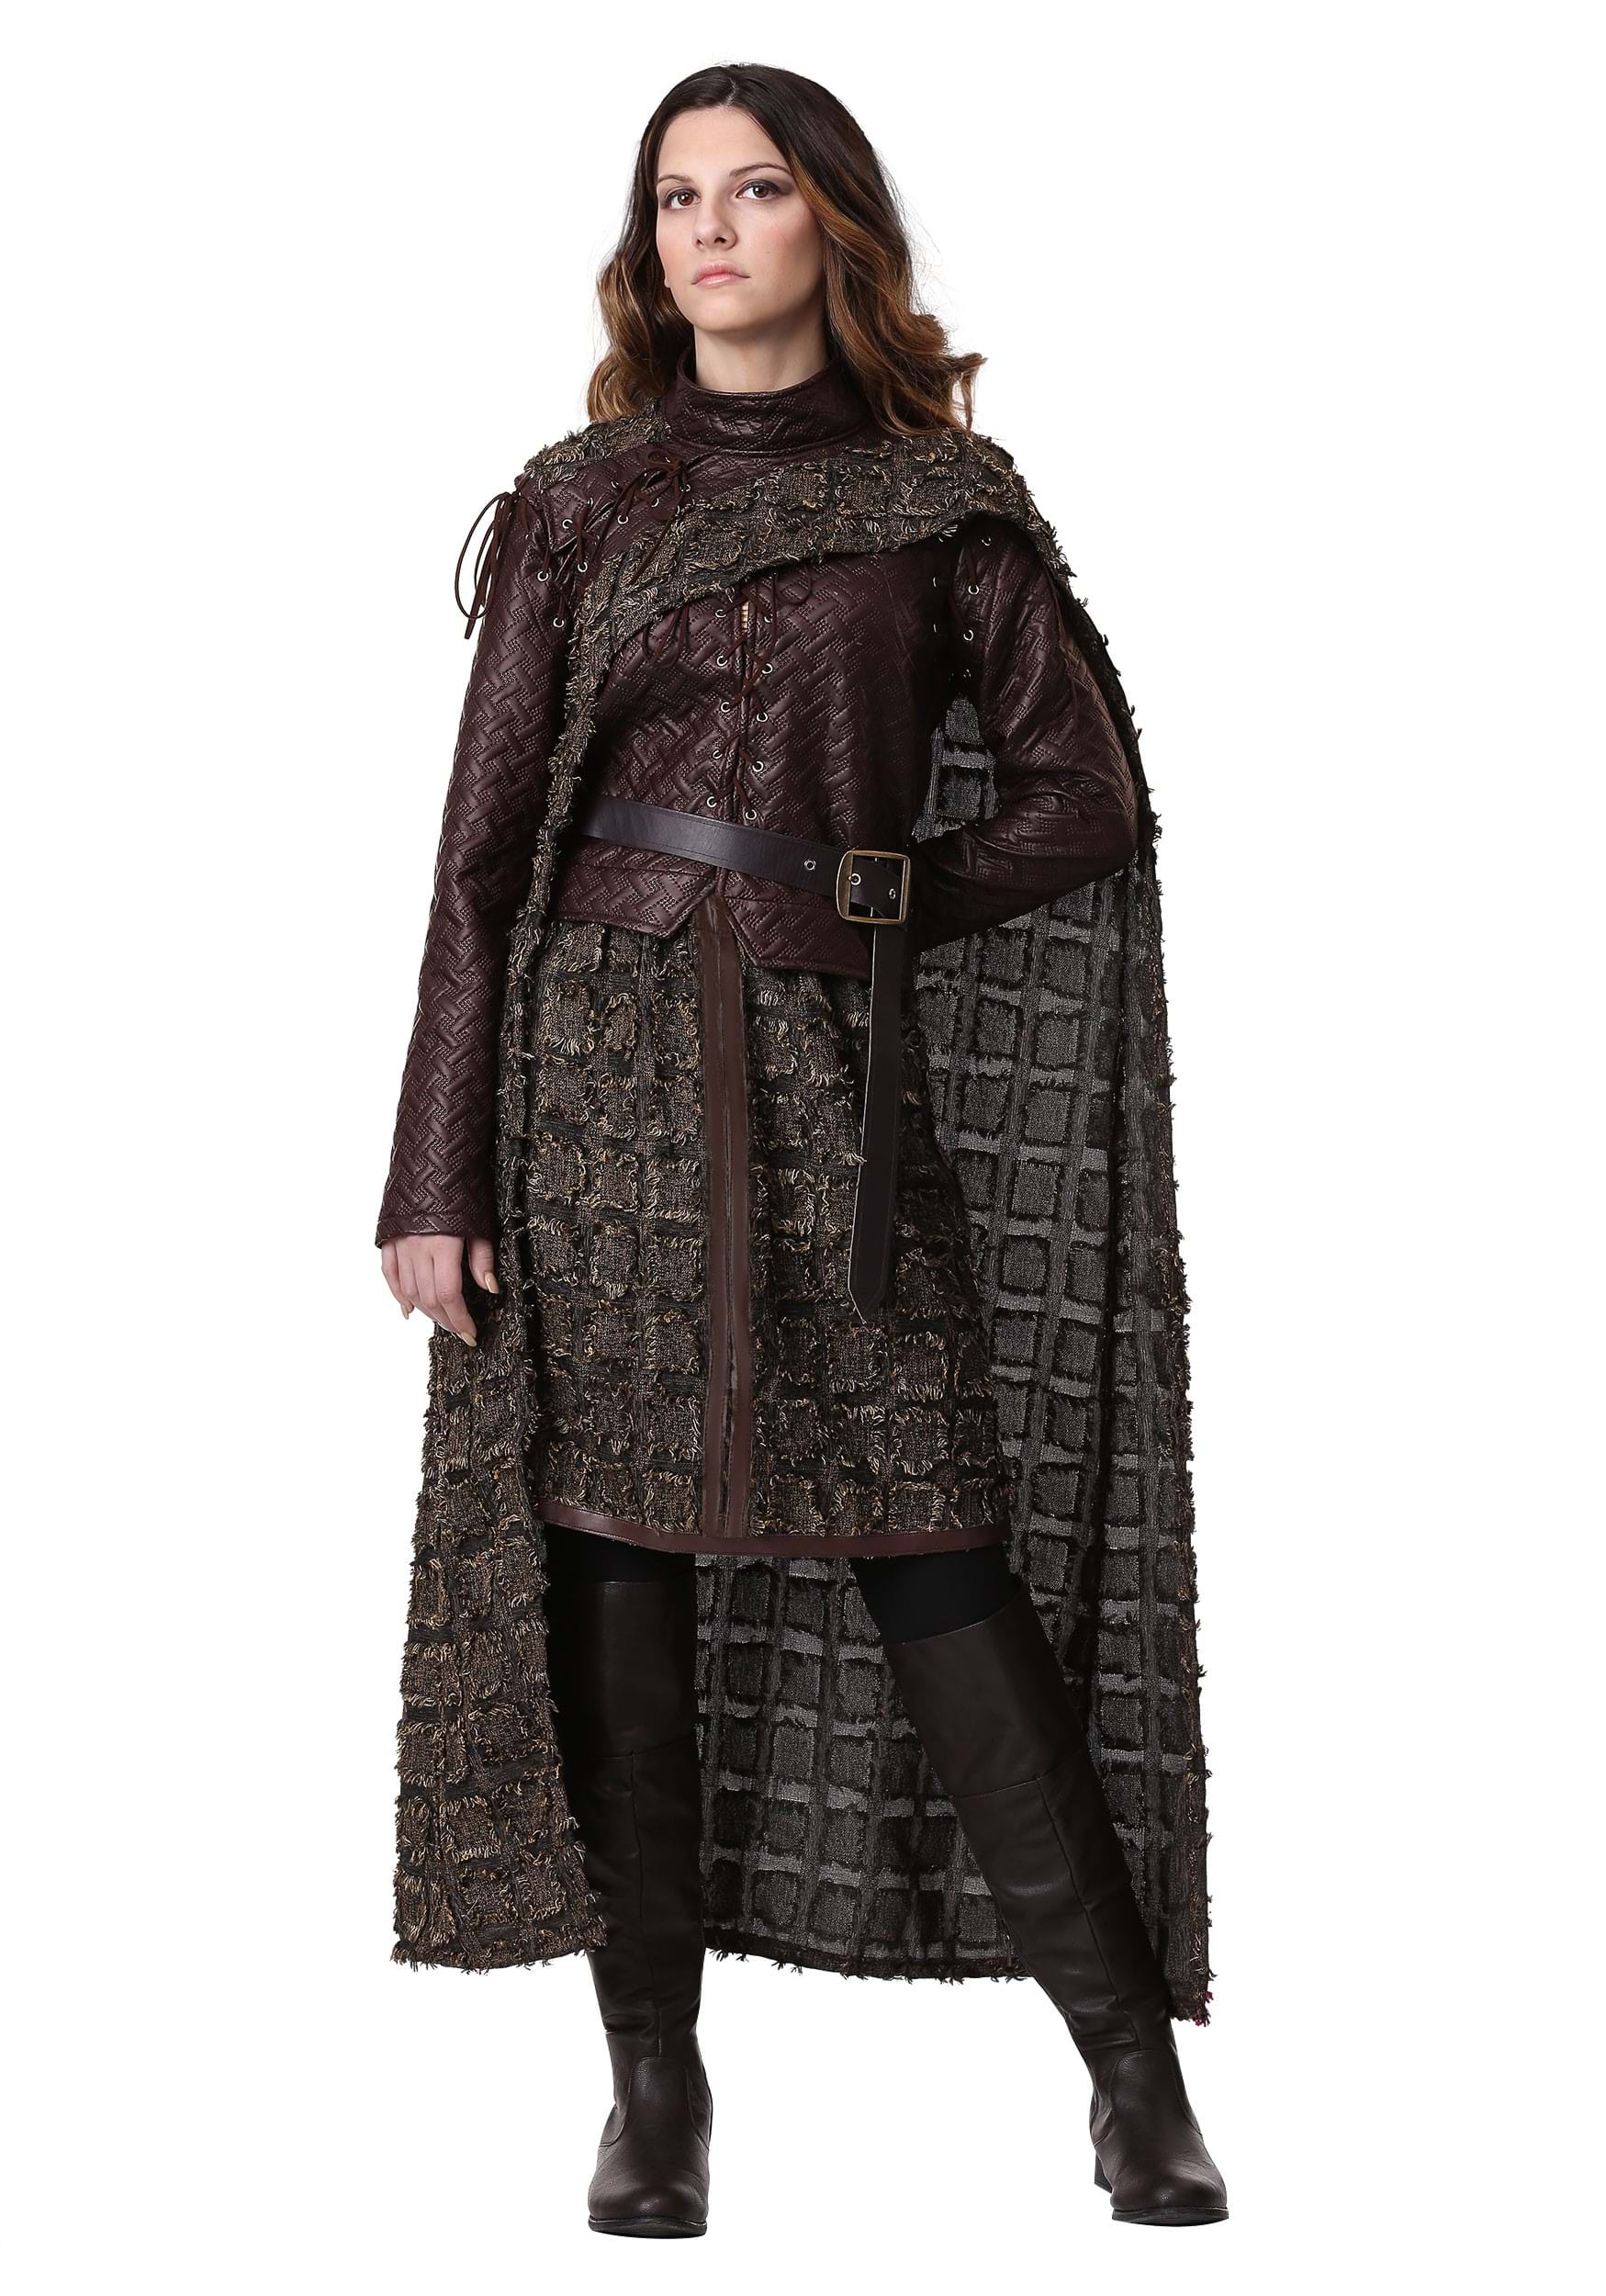 Image of Women's Winter Warrior Costume with Cape & Jacket ID FUN6363AD-M